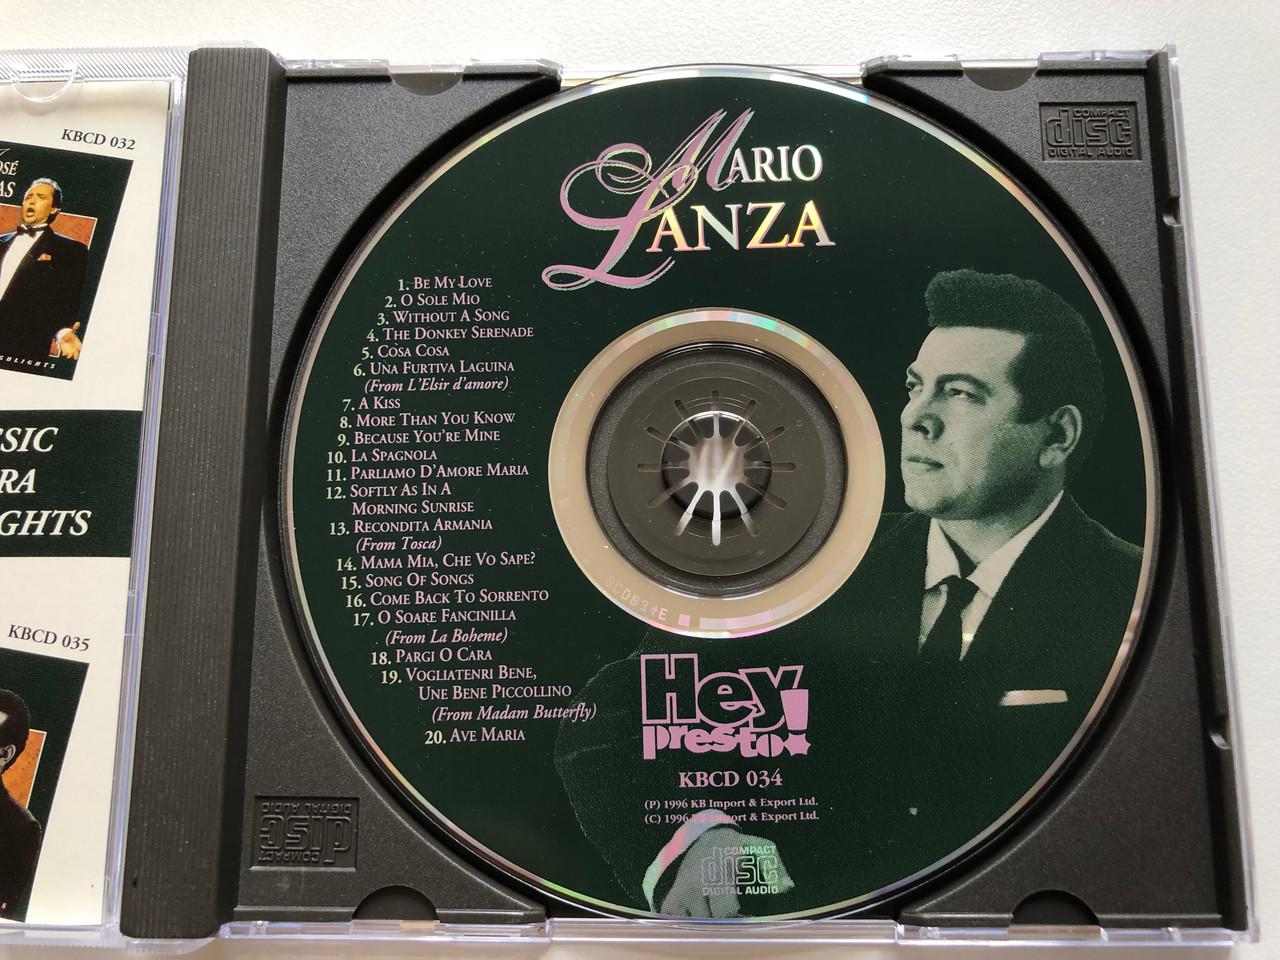 https://cdn10.bigcommerce.com/s-62bdpkt7pb/products/0/images/210701/Mario_Lanza_20_Classic_Opera_Highlights_Featuring..._Come_Back_To_Sorrento_More_Than_You_Know_Without_A_Song_O_Sole_Mio_Ave_Maria_Hey_Presto_Audio_CD_1996_KBCD_034_3__48076.1643693694.1280.1280.JPG?c=2&_gl=1*5zxei5*_ga*MjA2NTIxMjE2MC4xNTkwNTEyNTMy*_ga_WS2VZYPC6G*MTY0MzY5MjIzNi4yODEuMS4xNjQzNjkzNDc3LjE3